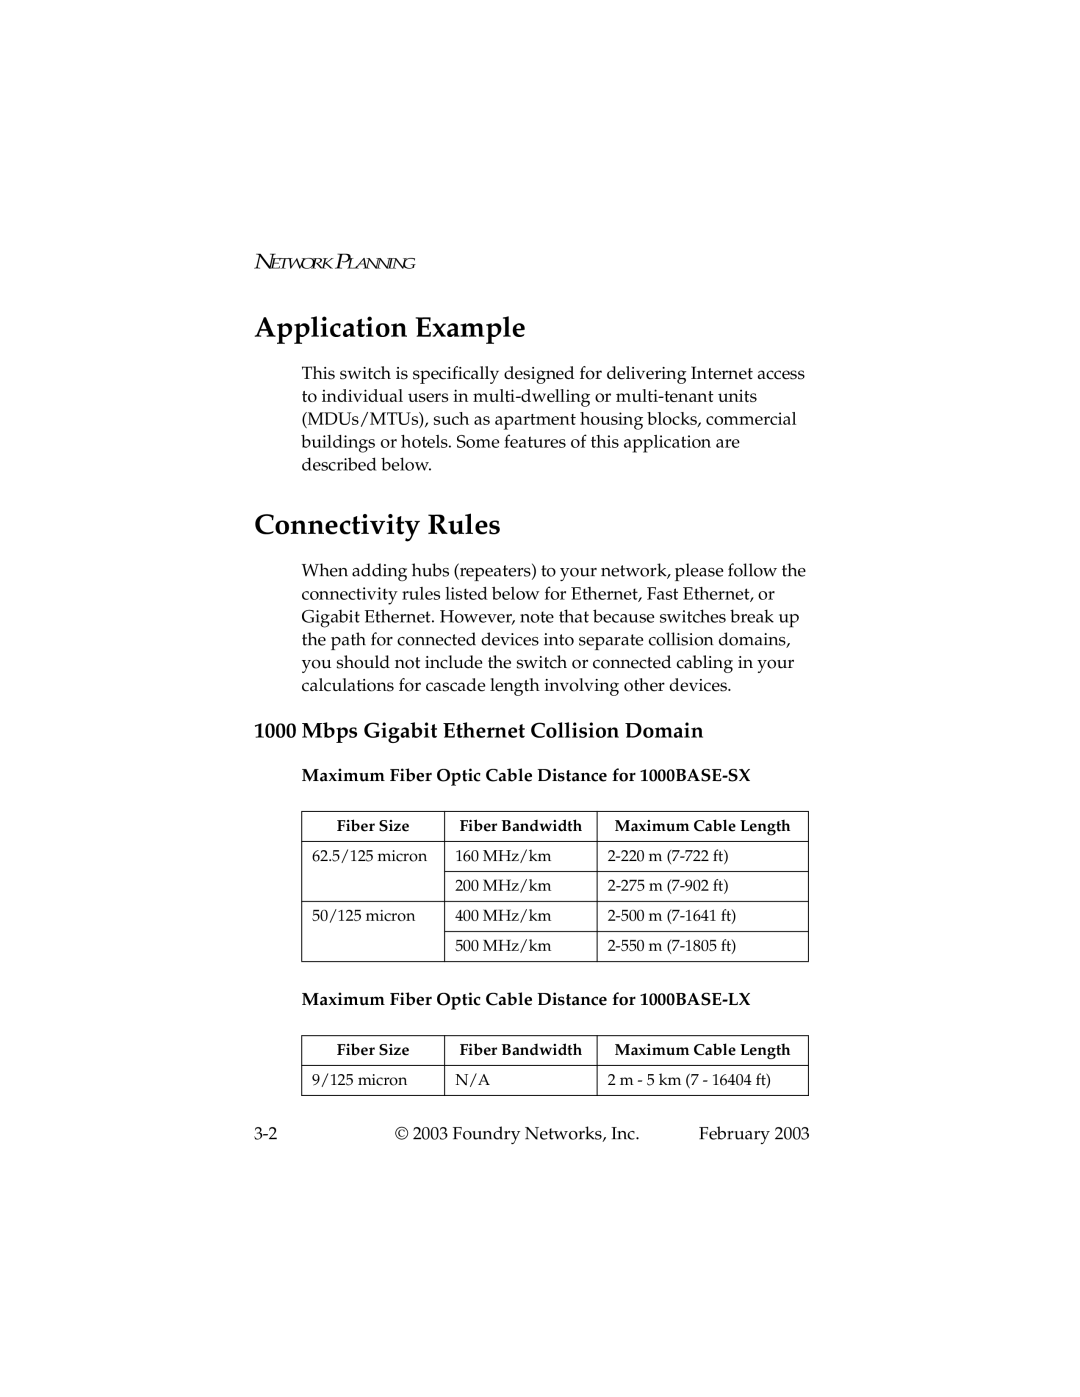 Foundry Networks 2402CF manual Application Example, Connectivity Rules, Mbps Gigabit Ethernet Collision Domain 